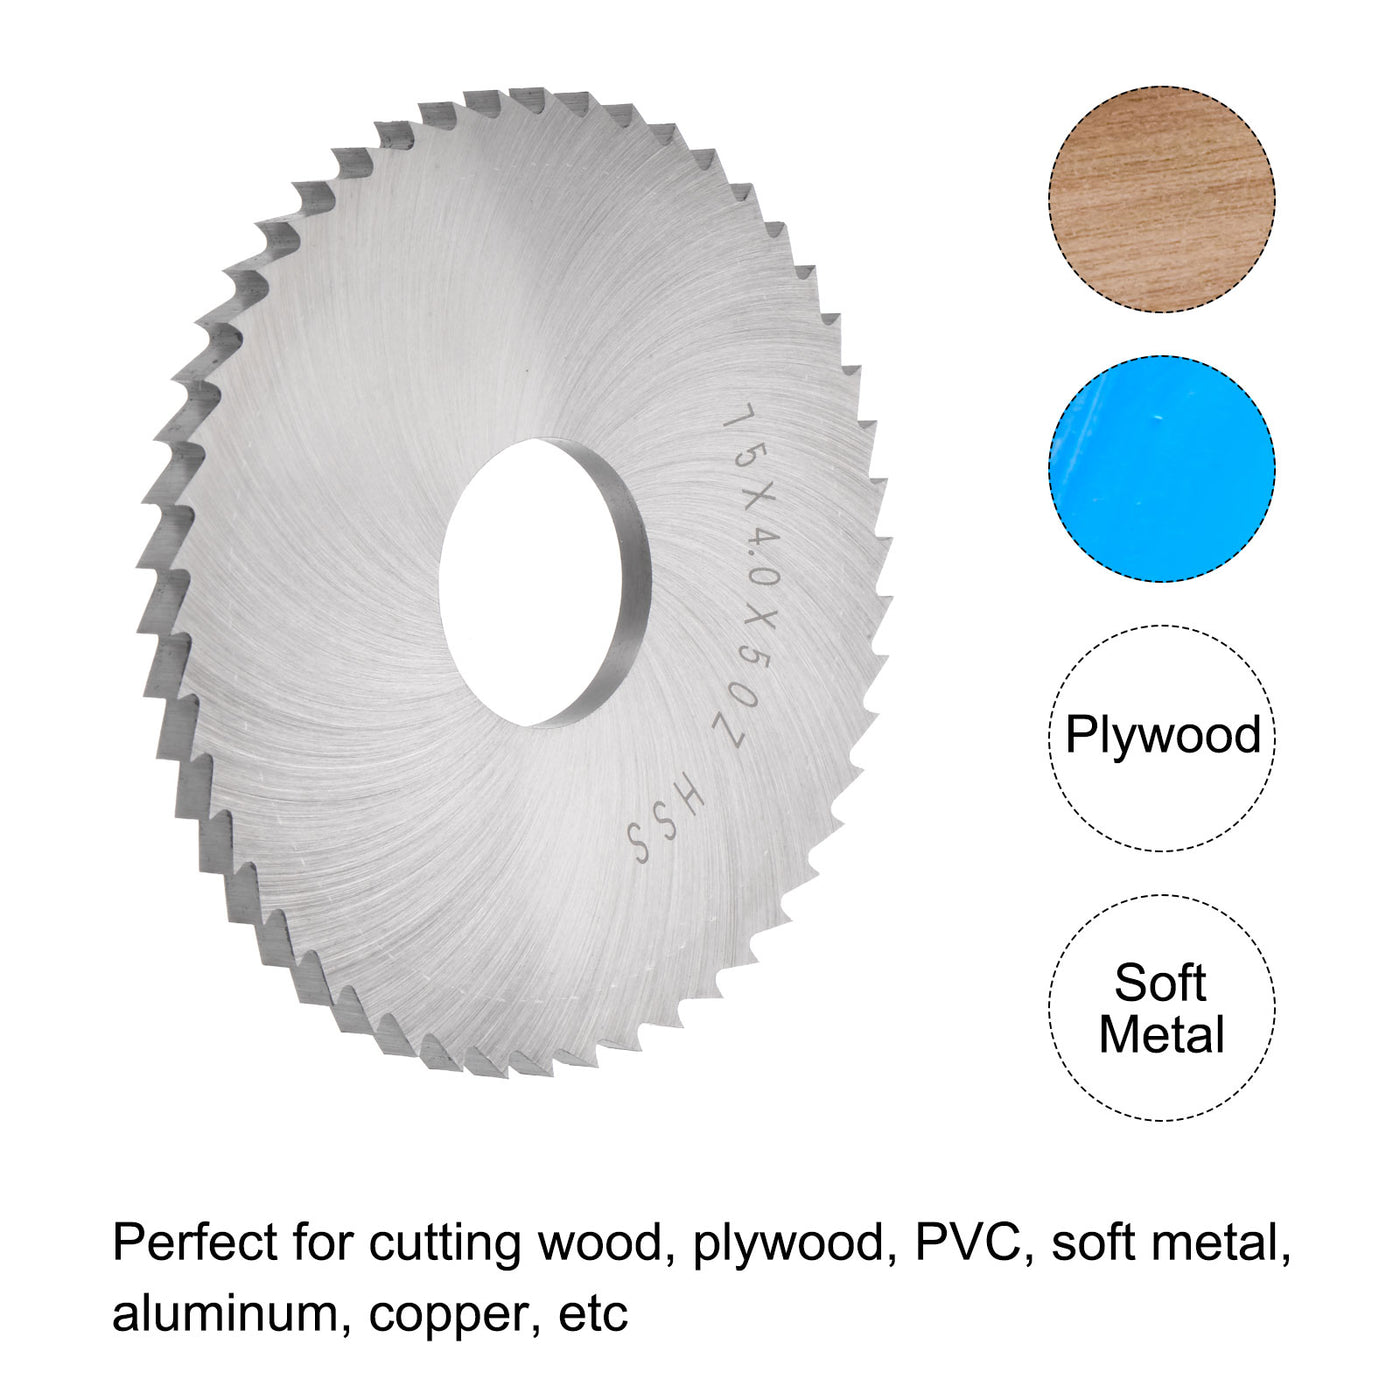 Uxcell Uxcell 75mm Dia 22mm Arbor 5mm Thick 50 Tooth High Speed Steel Circular Saw Blade